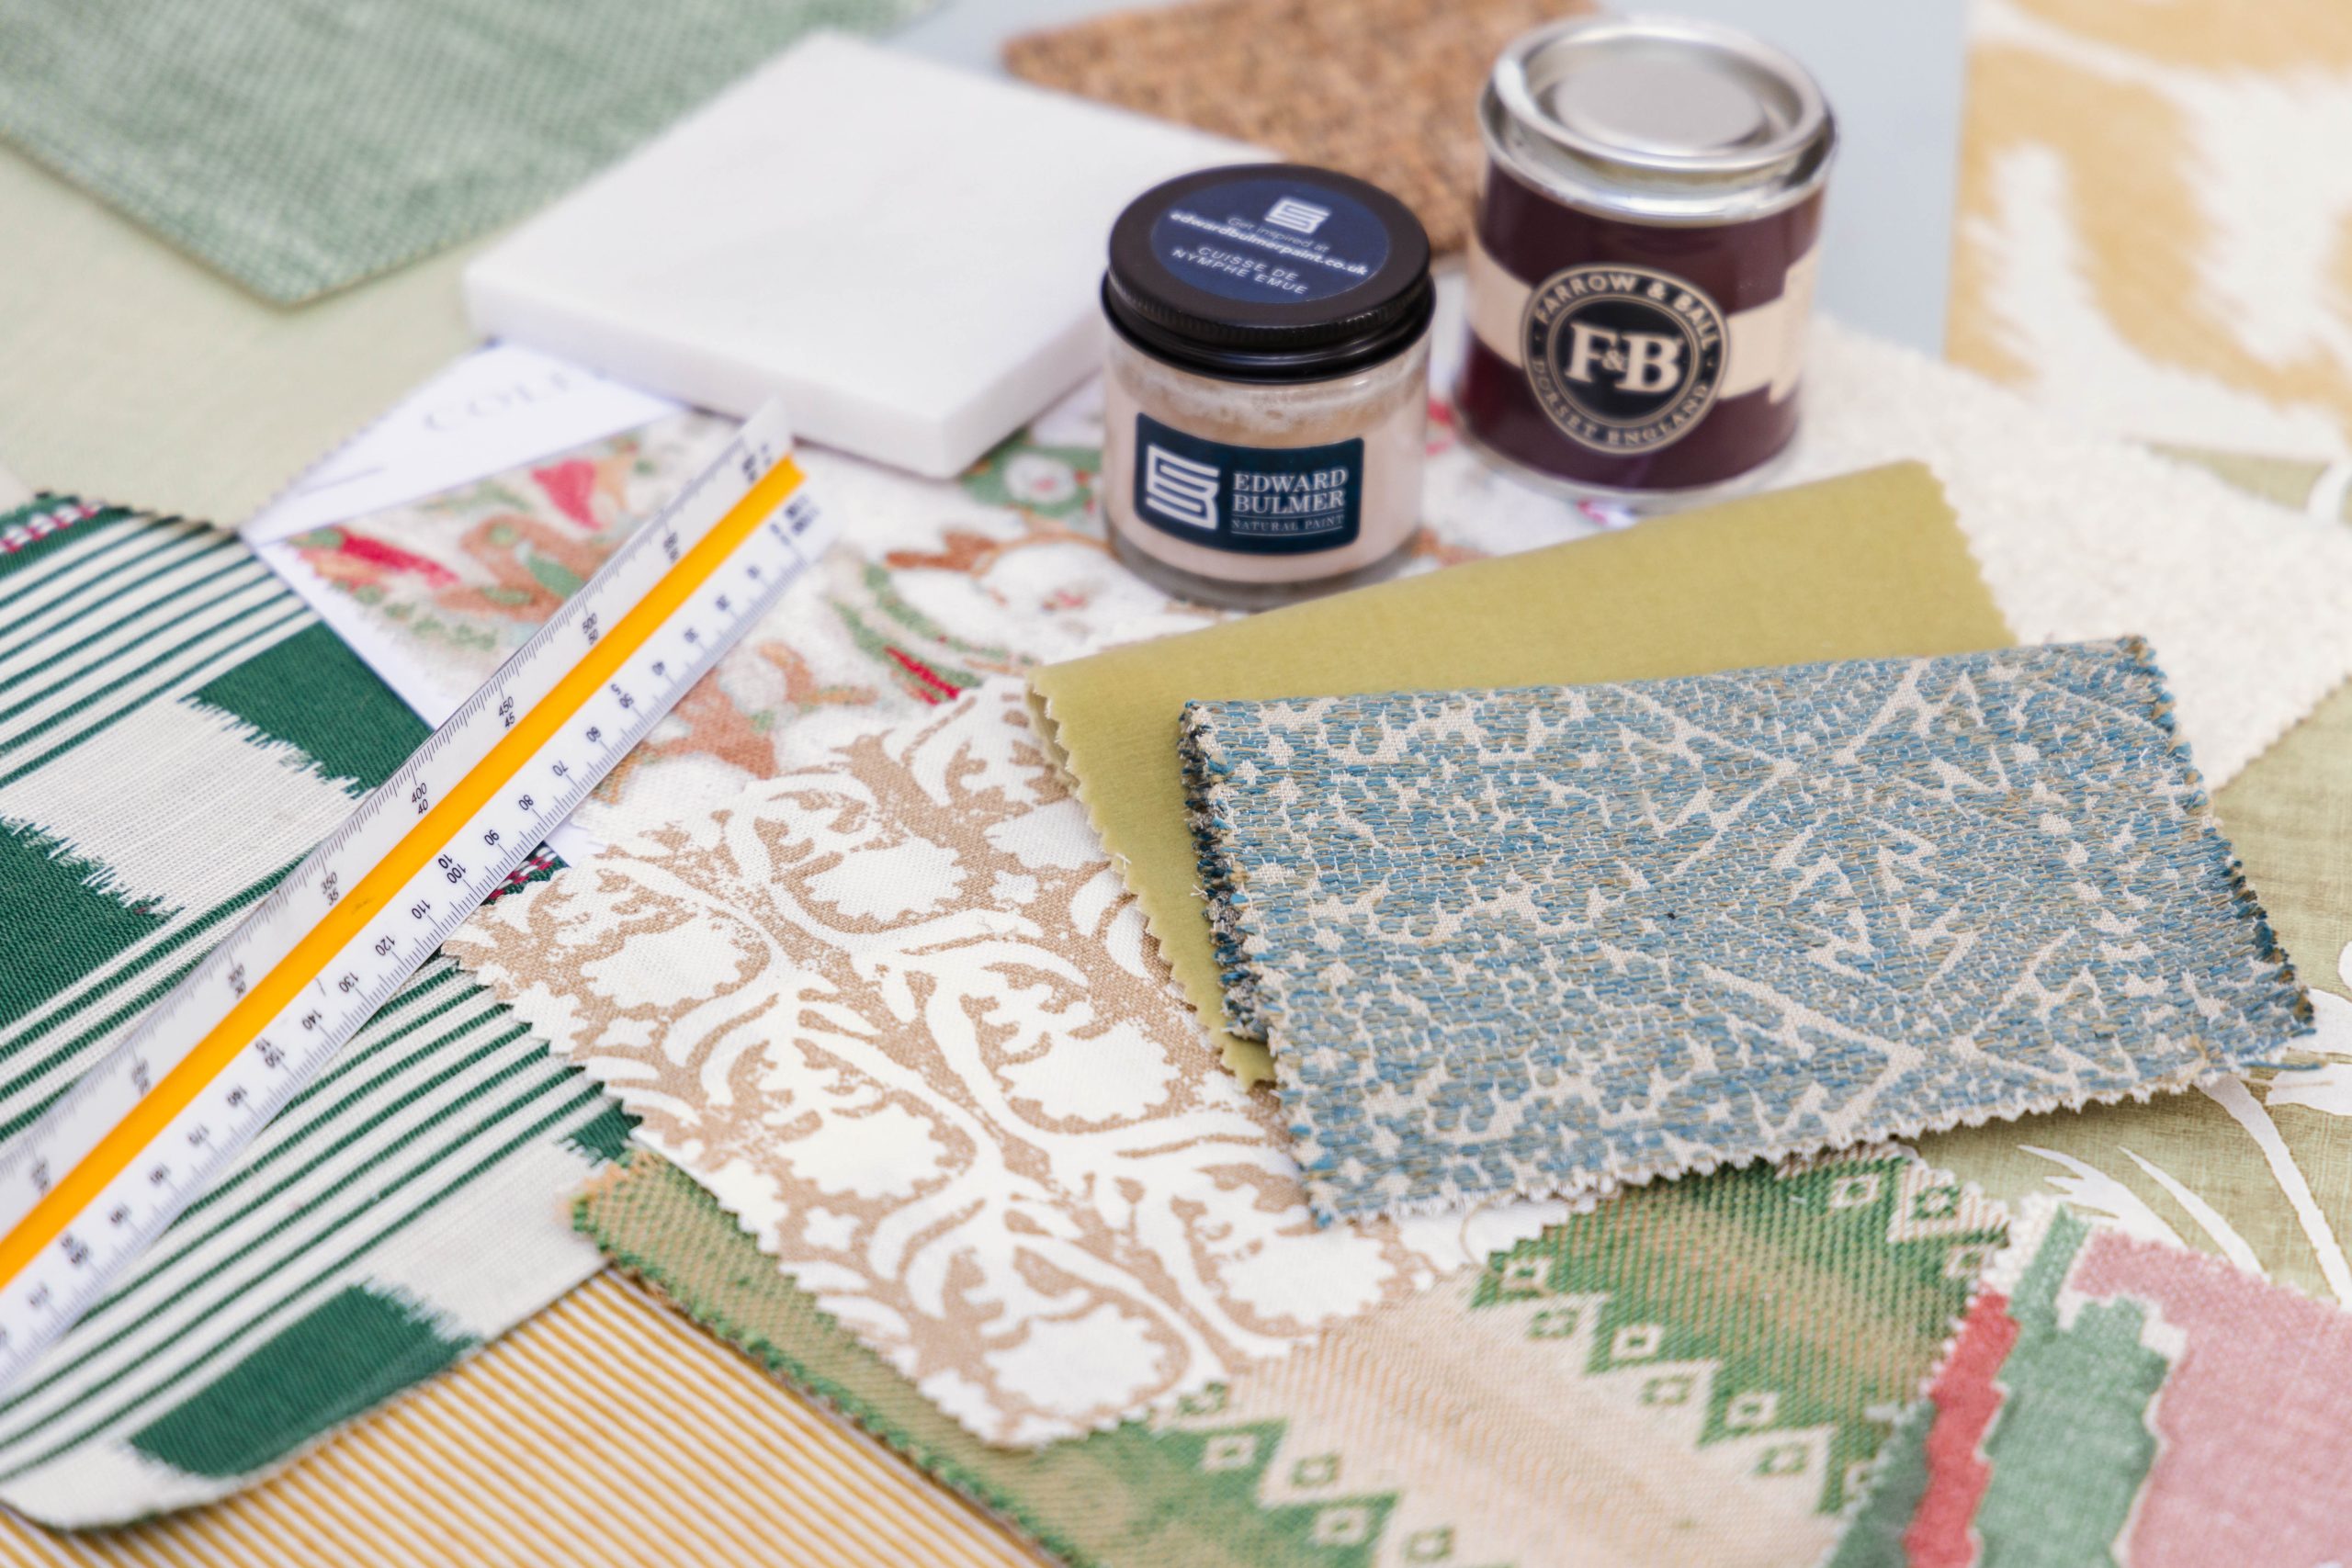 image showing fabric samples, floor tiles, tester paint pots and scale ruler for interior designer